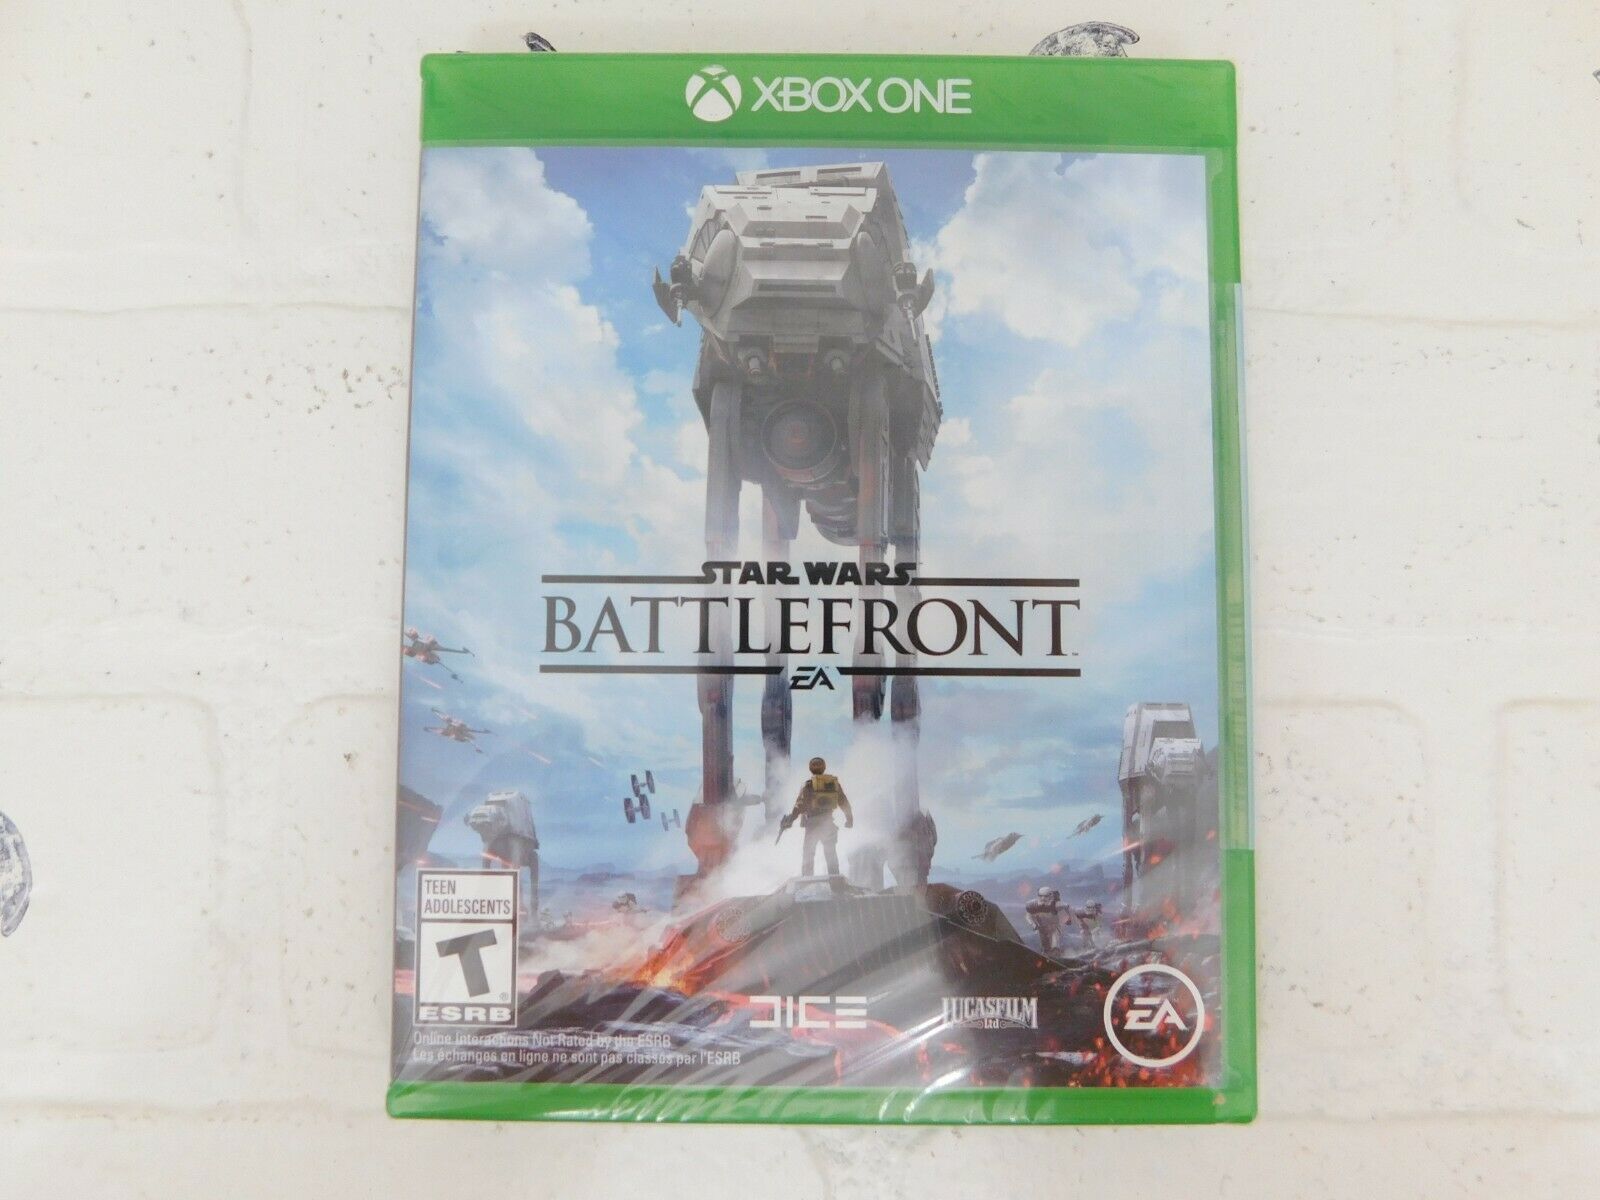 Primary image for Star Wars: Battlefront (Microsoft Xbox One, 2015)